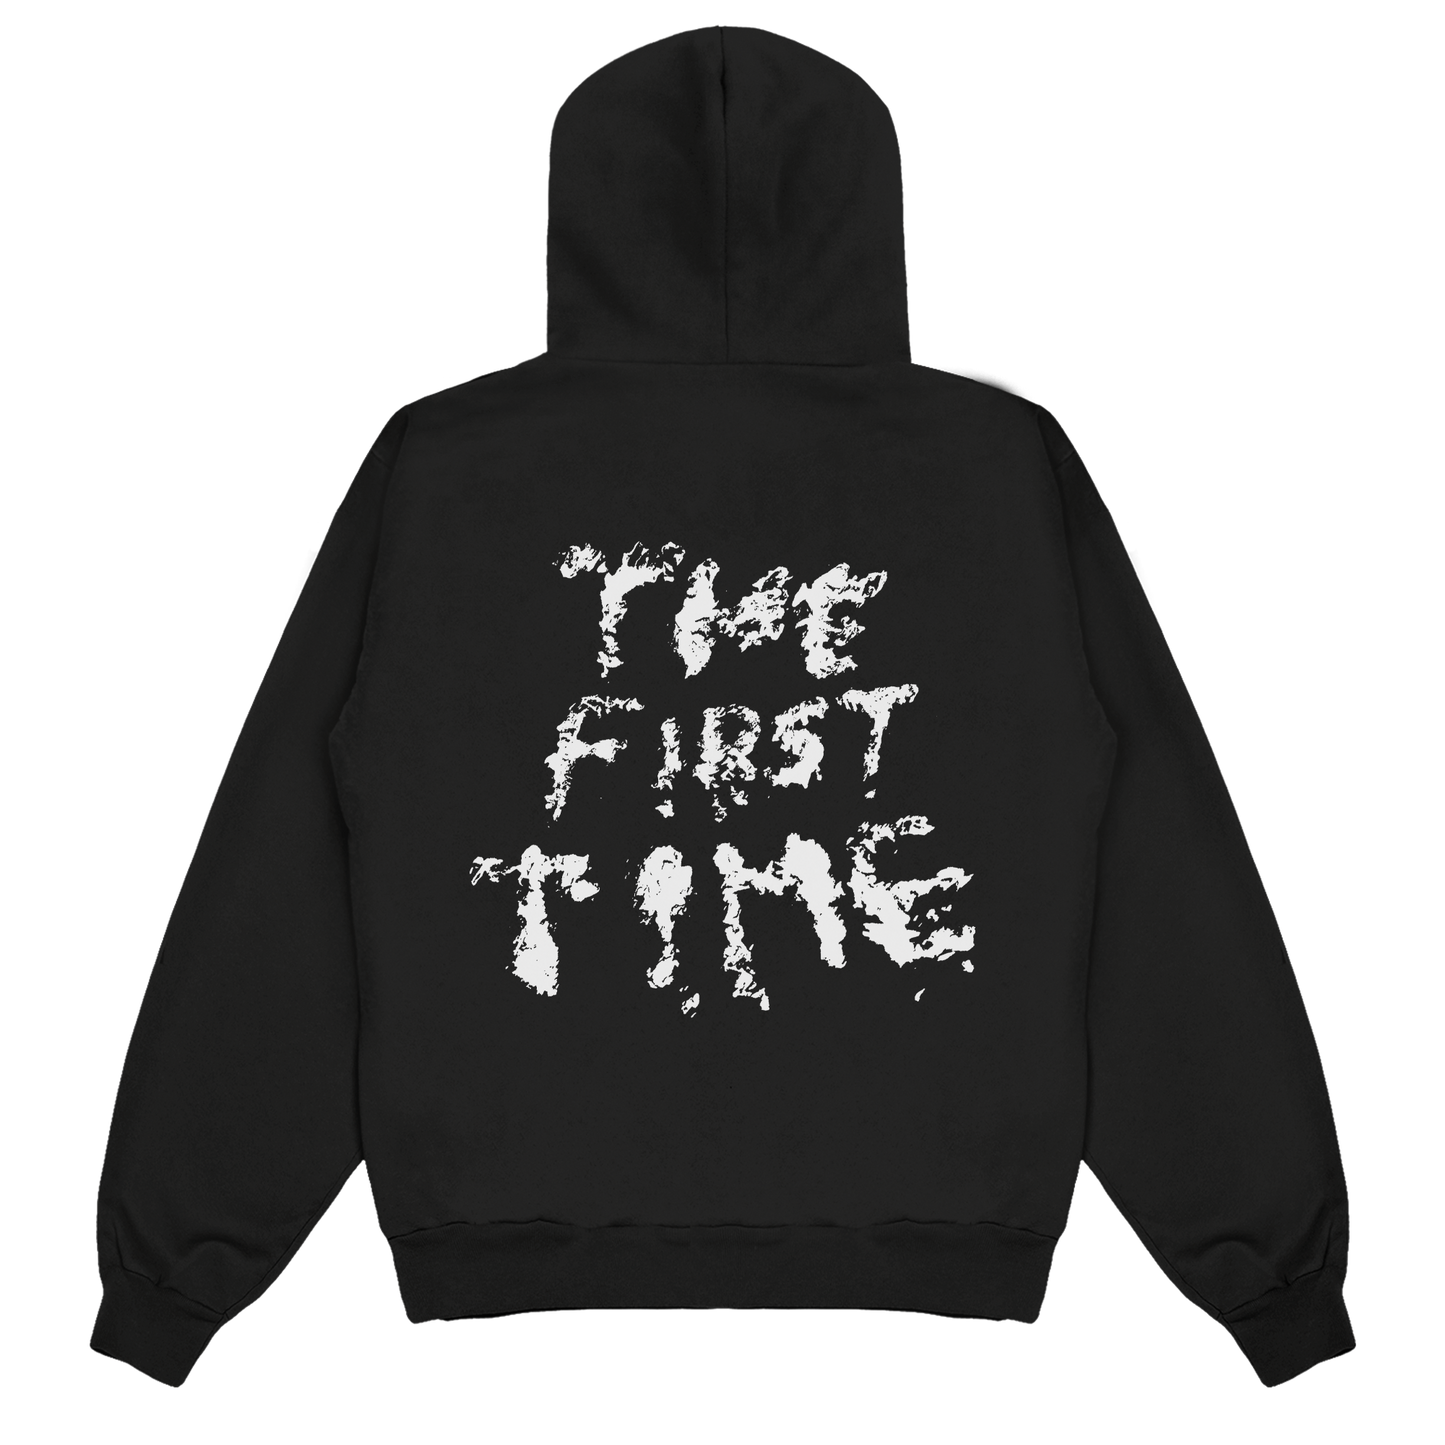 The First Time Band-Aid Hoodie